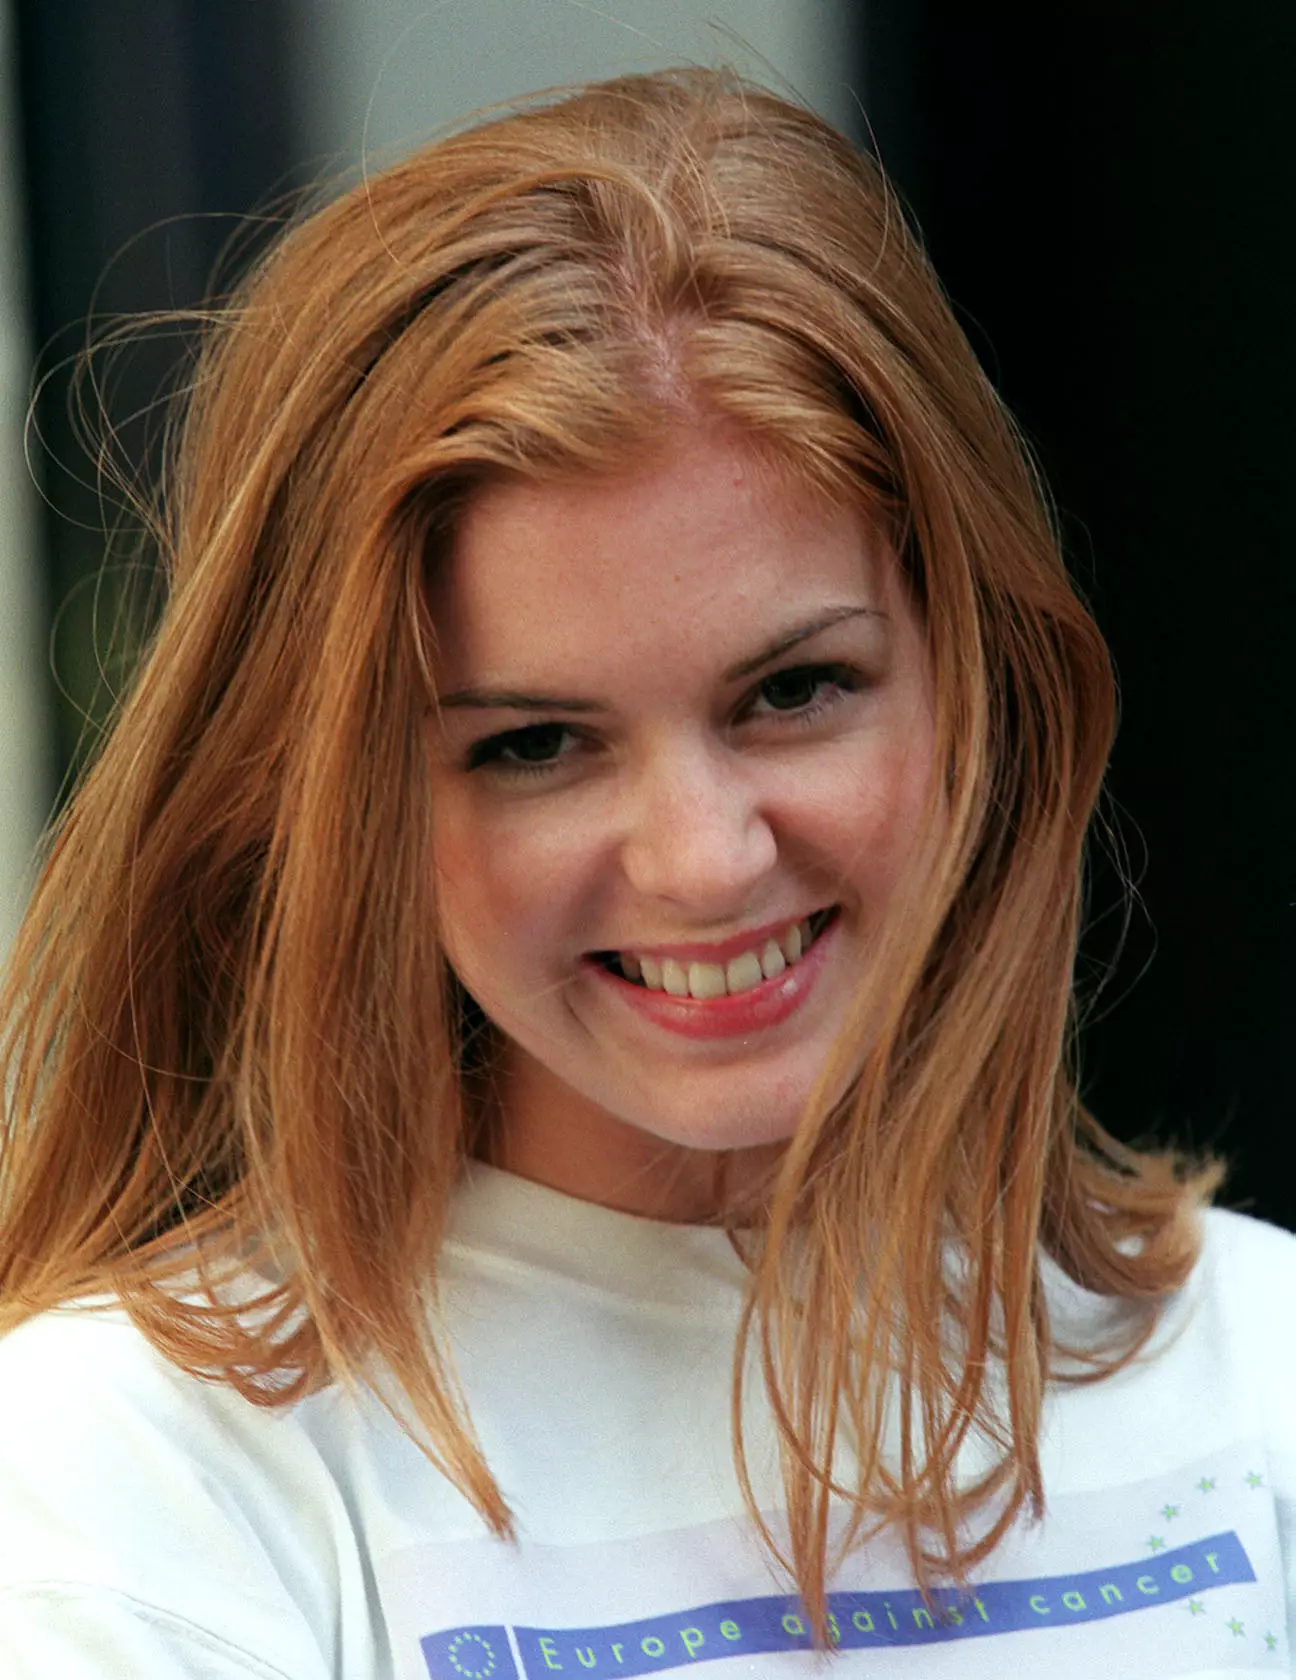 Isla Fisher starred in 'Home and Away' back in the 90's.